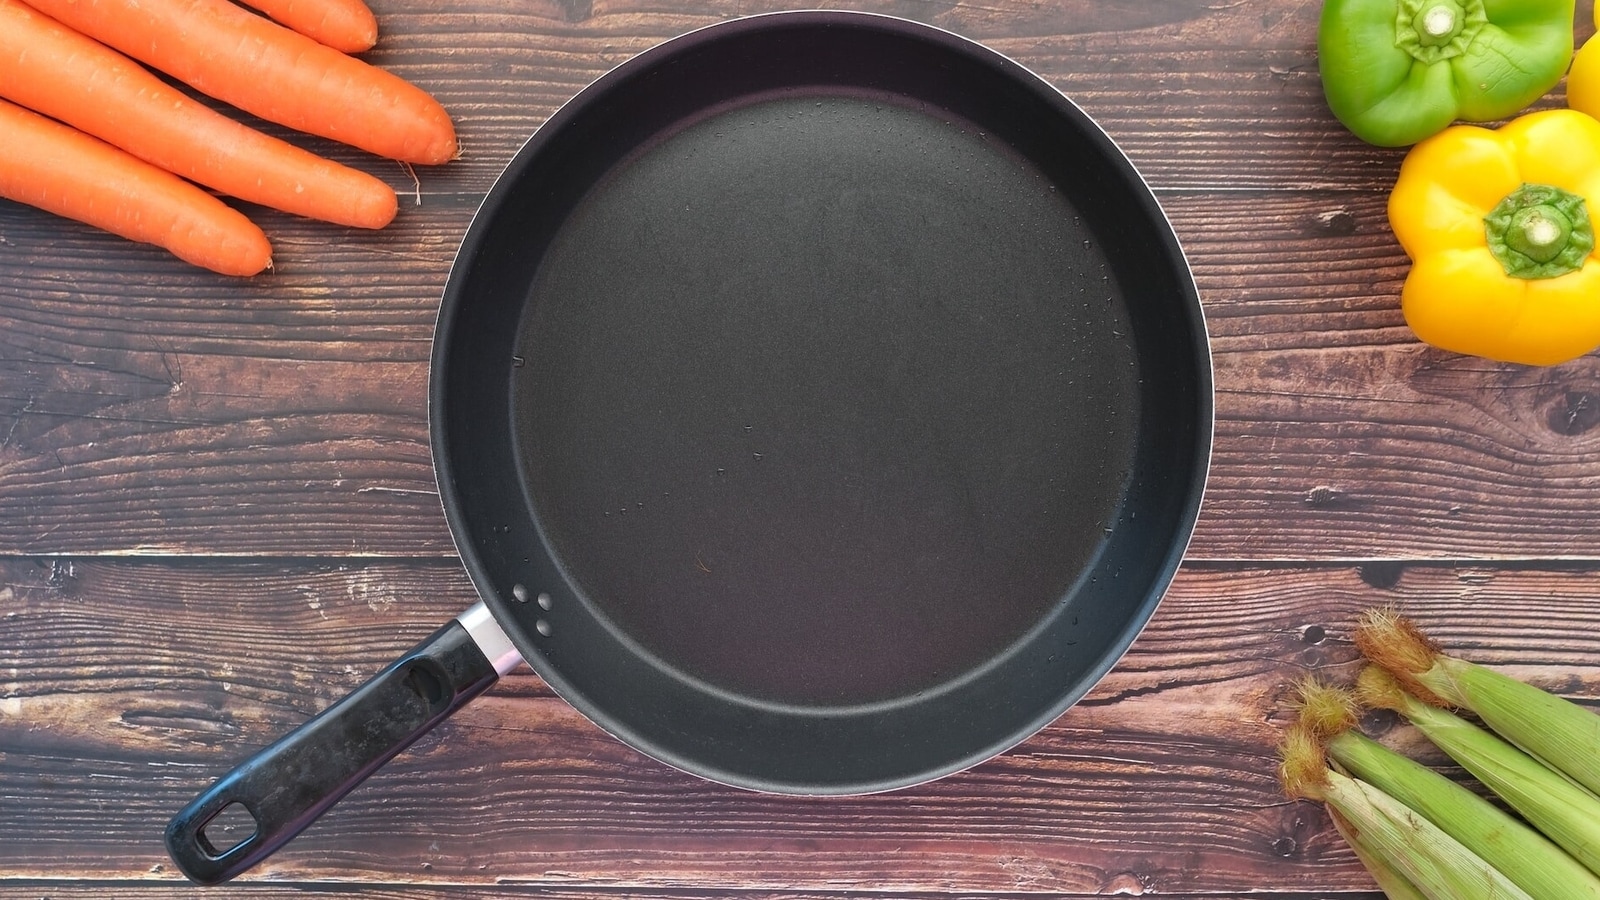 MSMK 8 inch Nonstick Frying pan with Lid Small, Egg Burnt also Non